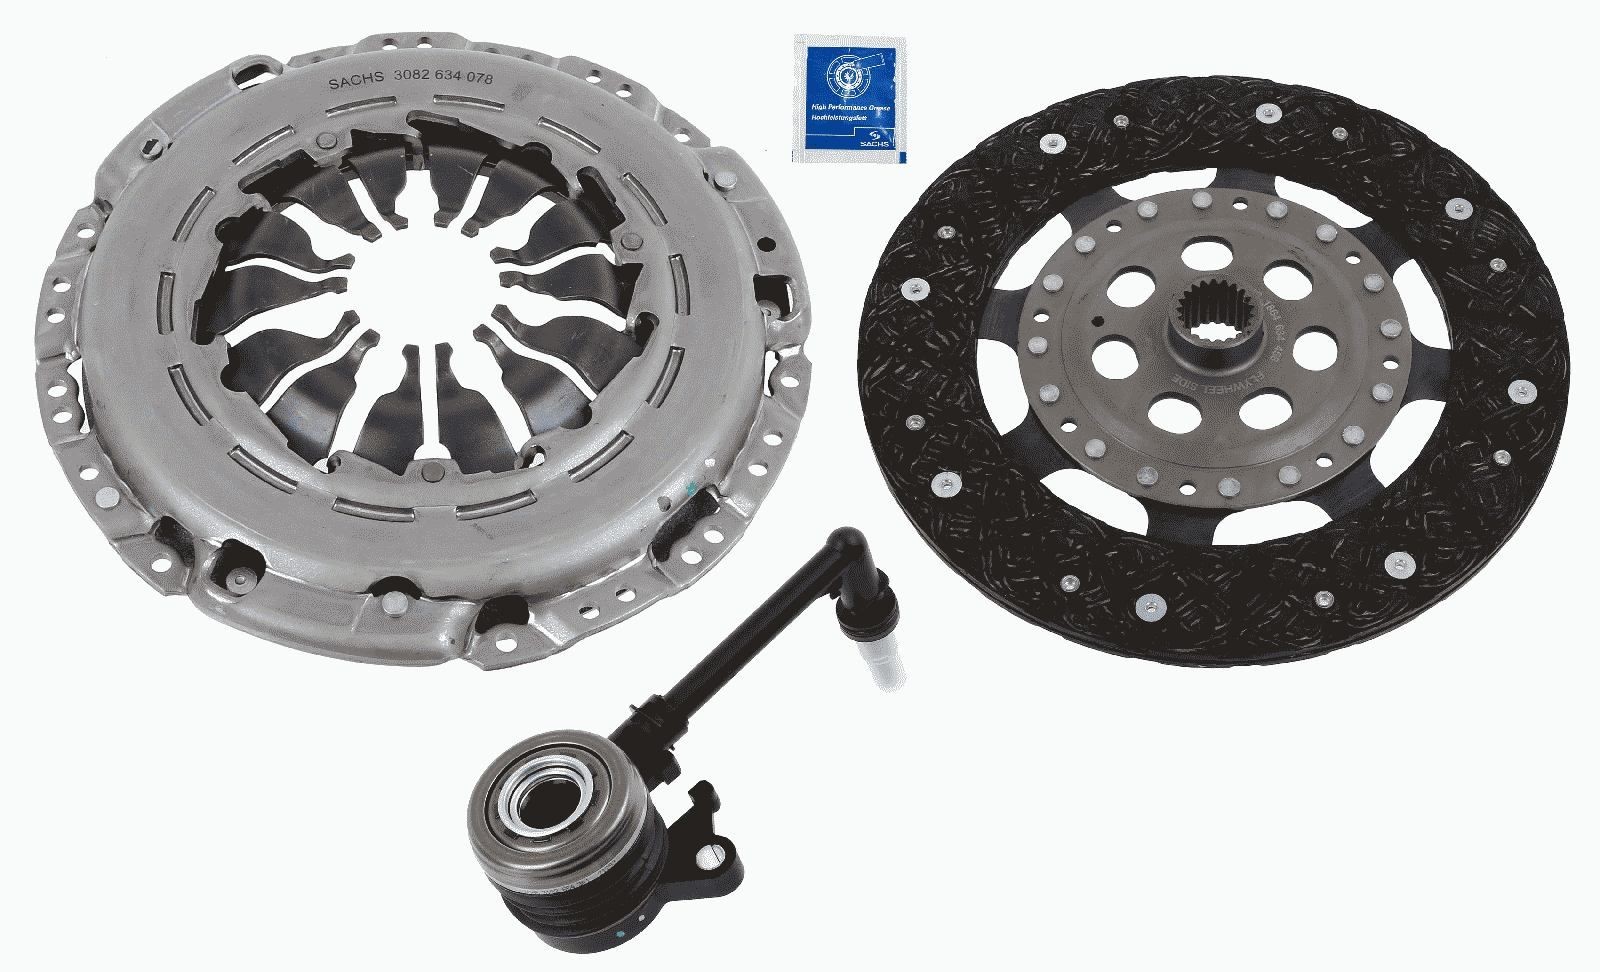 Nissan TRADE Complete clutch kit 18408672 SACHS 3000 990 571 online buy